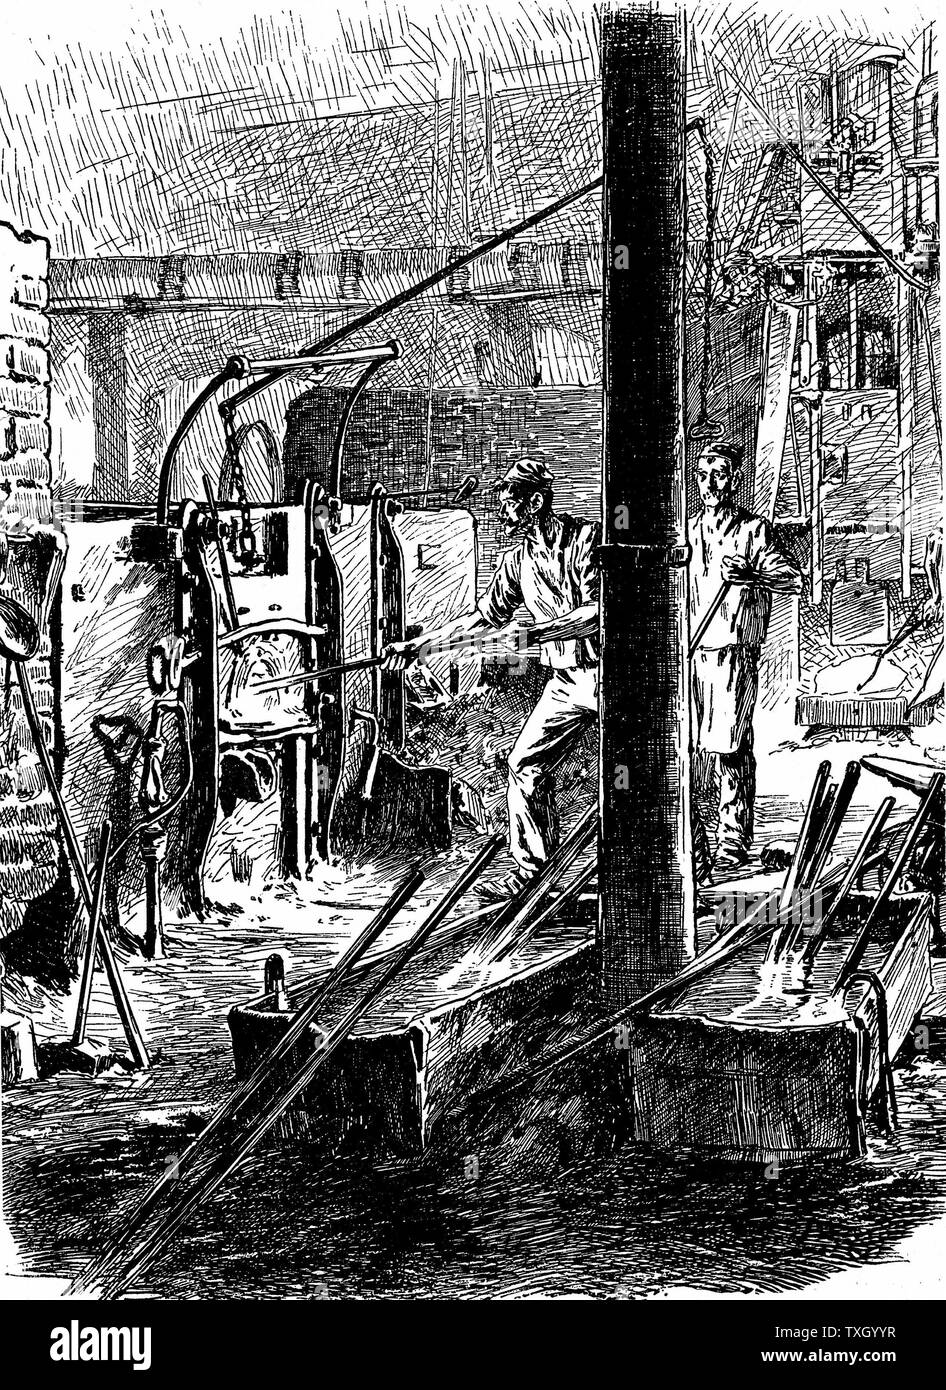 Puddling furnace and mechanical hammer (right background): Pig iron puddled to remove carbon and oxygen, ball of hot metal (bloom) then hammered. Process sometimes repeated. Purest form of iron with great strength produced. Krupps Works, Essen, Germany. Wood engraving Leipzig c1895 Stock Photo